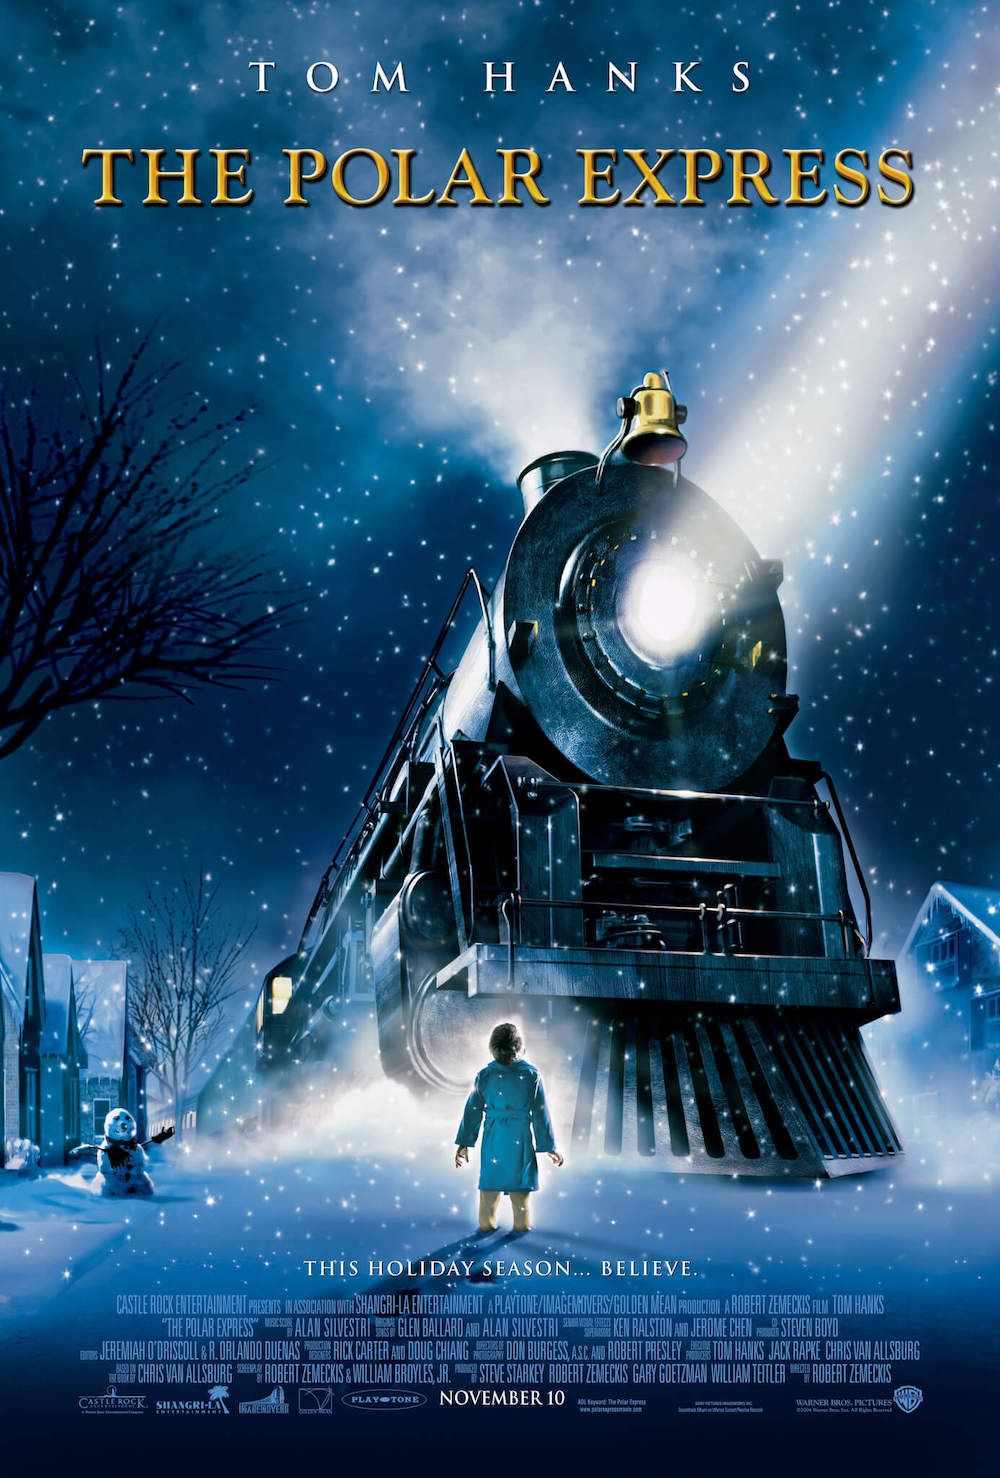 Watch The Polar Express, one of the best movies for 6 year olds on Netflix.